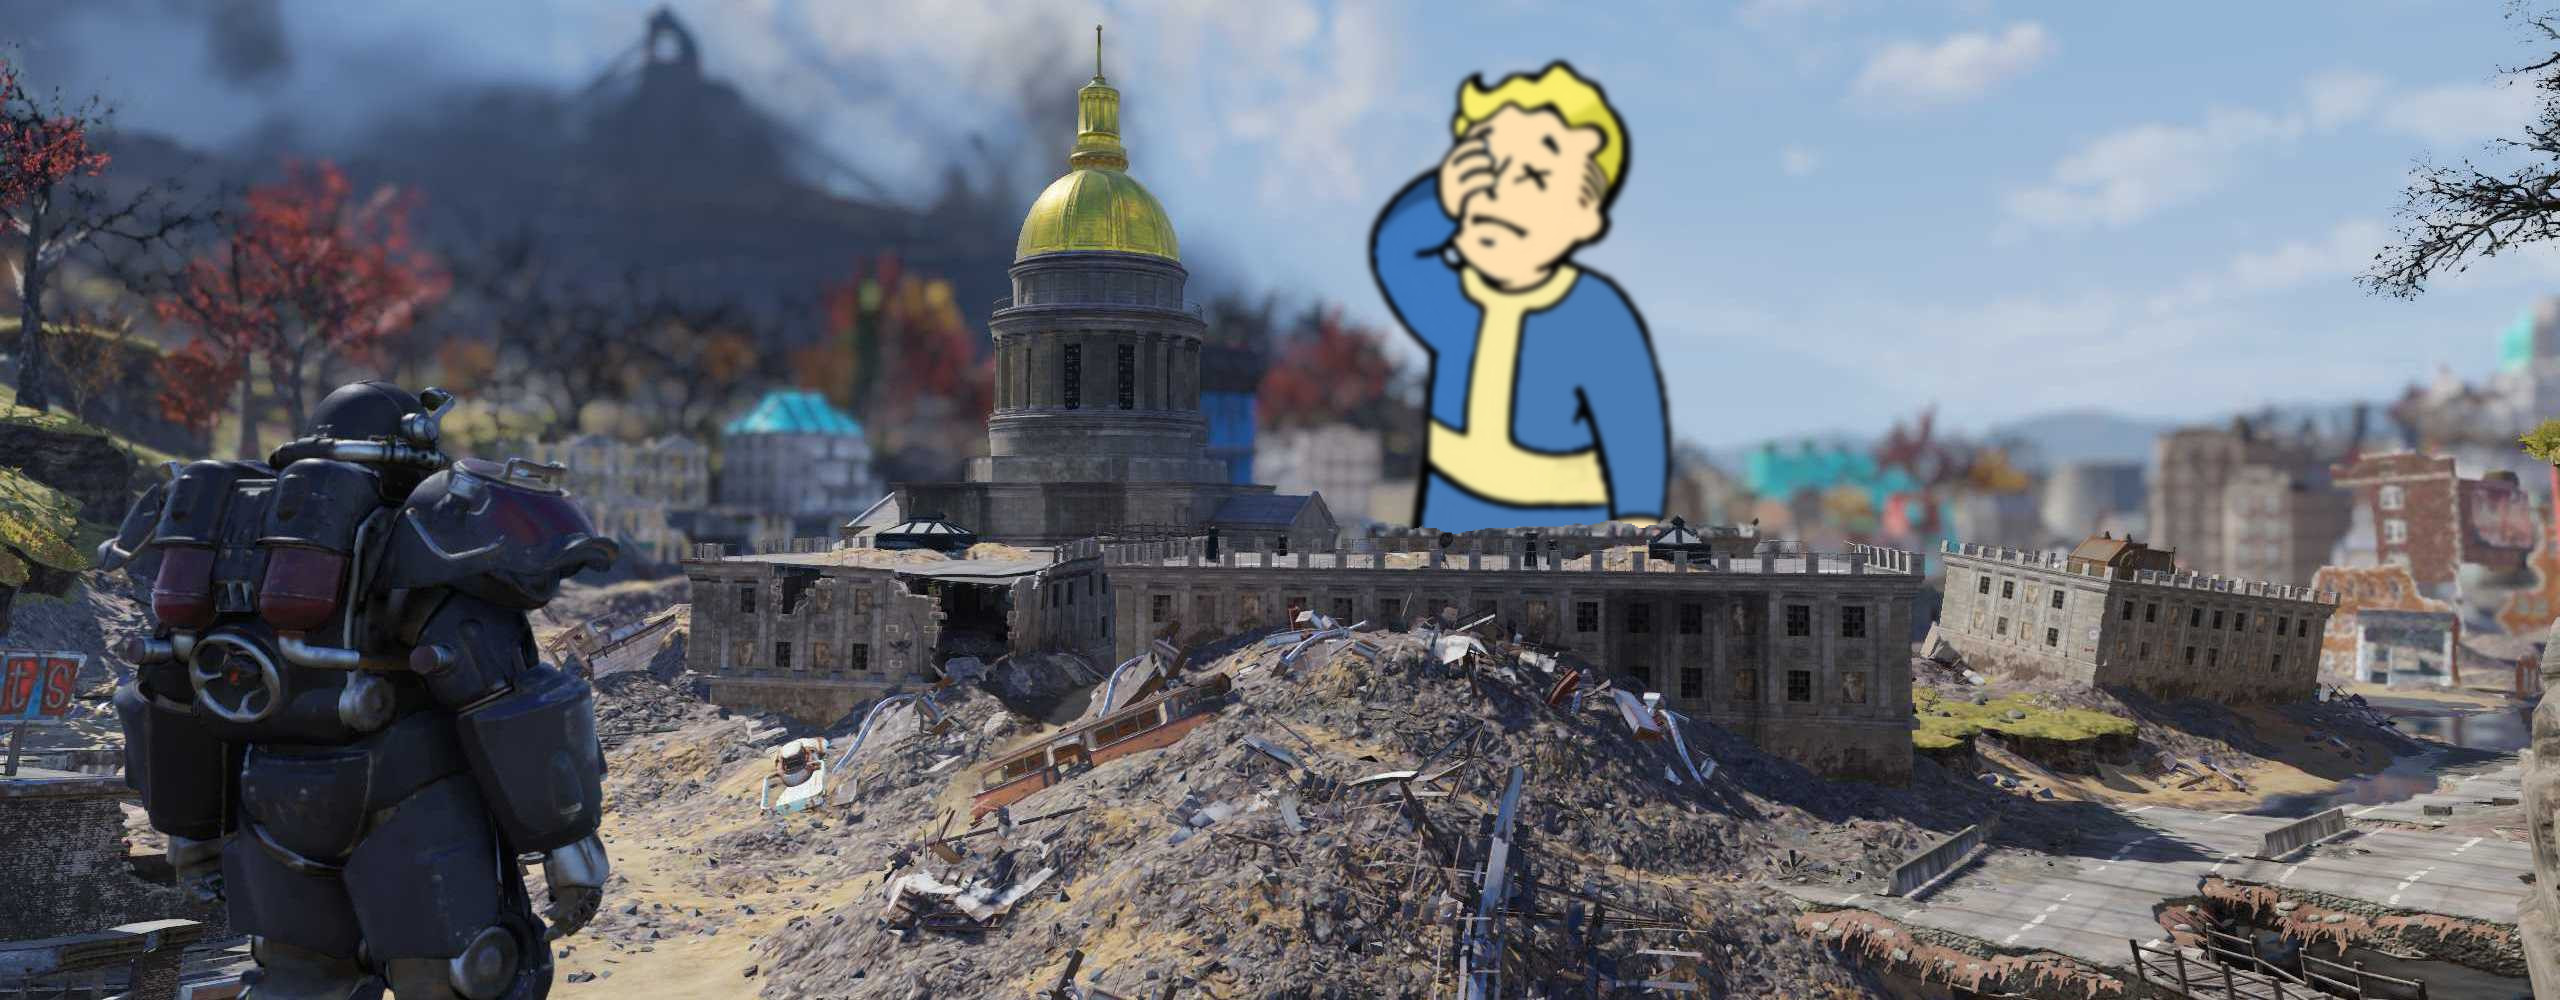 Fallout 76 Capitol Building in Charleston Vaultboy Facepalm